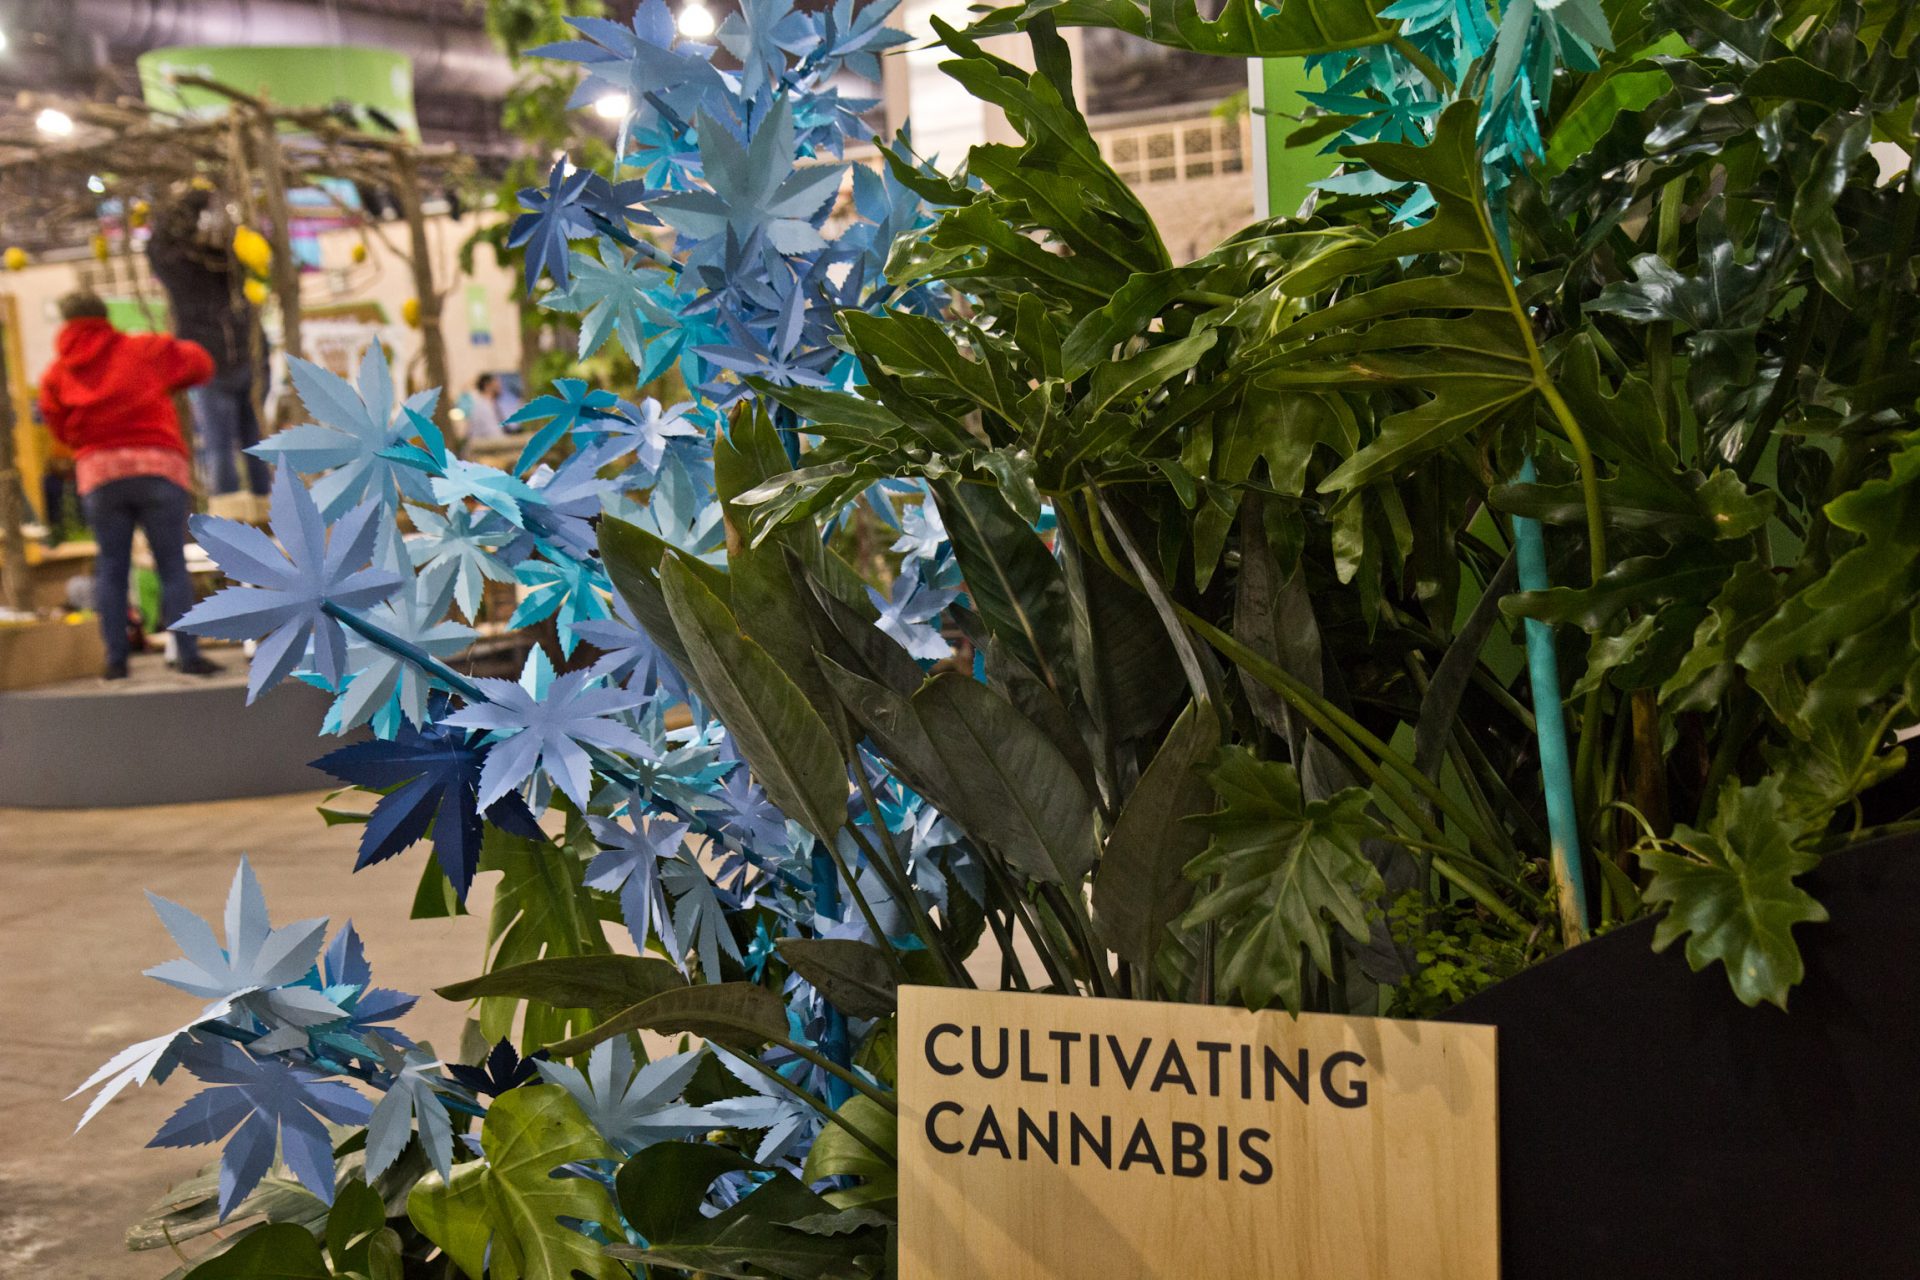 The 2020 Philadelphia Flower Show features the first exhibit dedicated to cannabis, without any actual cannabis plants.